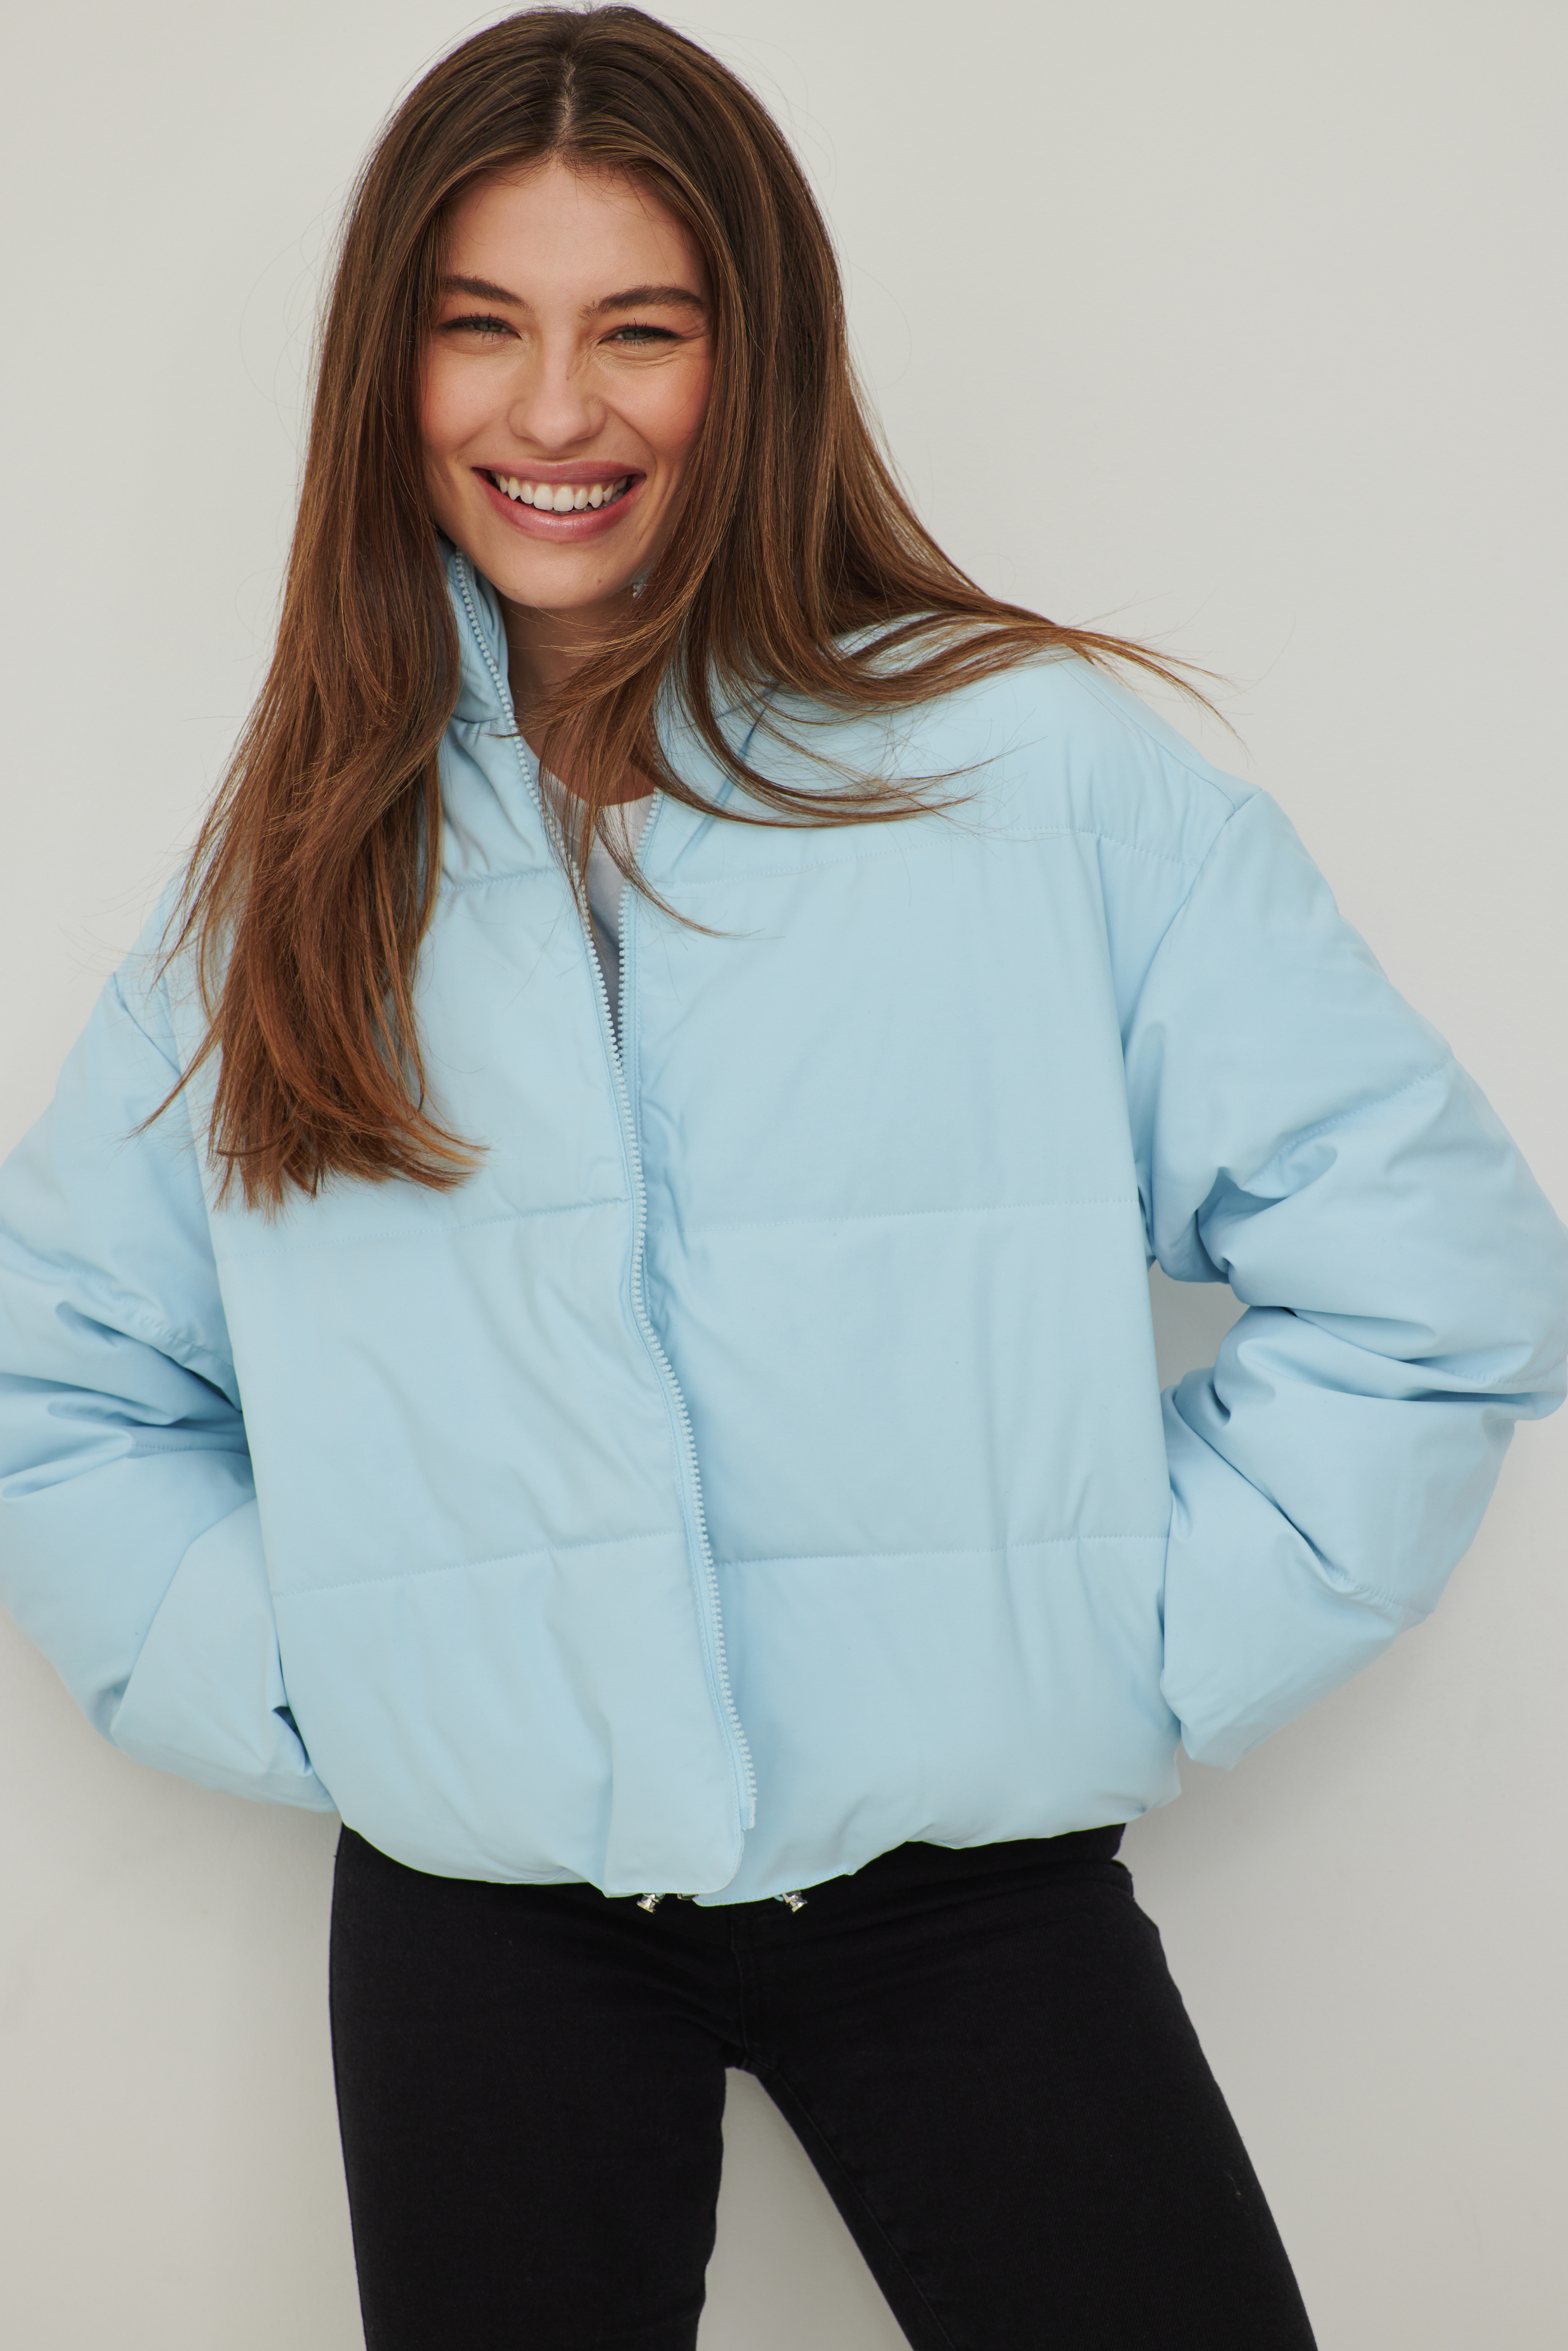 Cropped Puffer Jacket Outfit.